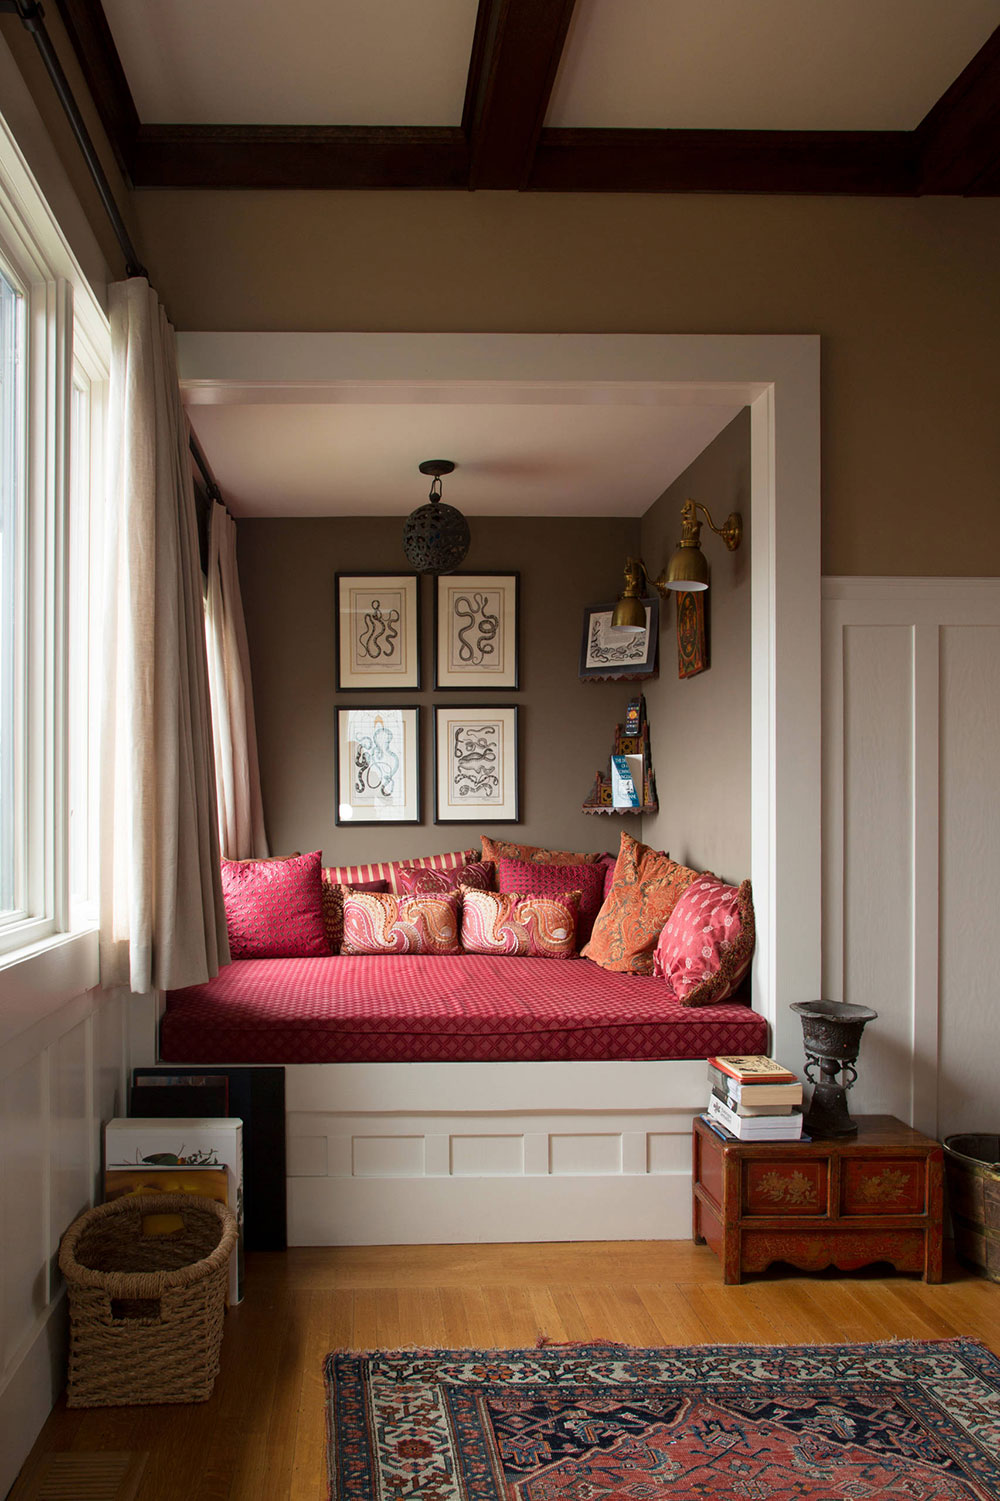 How To Design A Reading Nook For Poetic Moments11